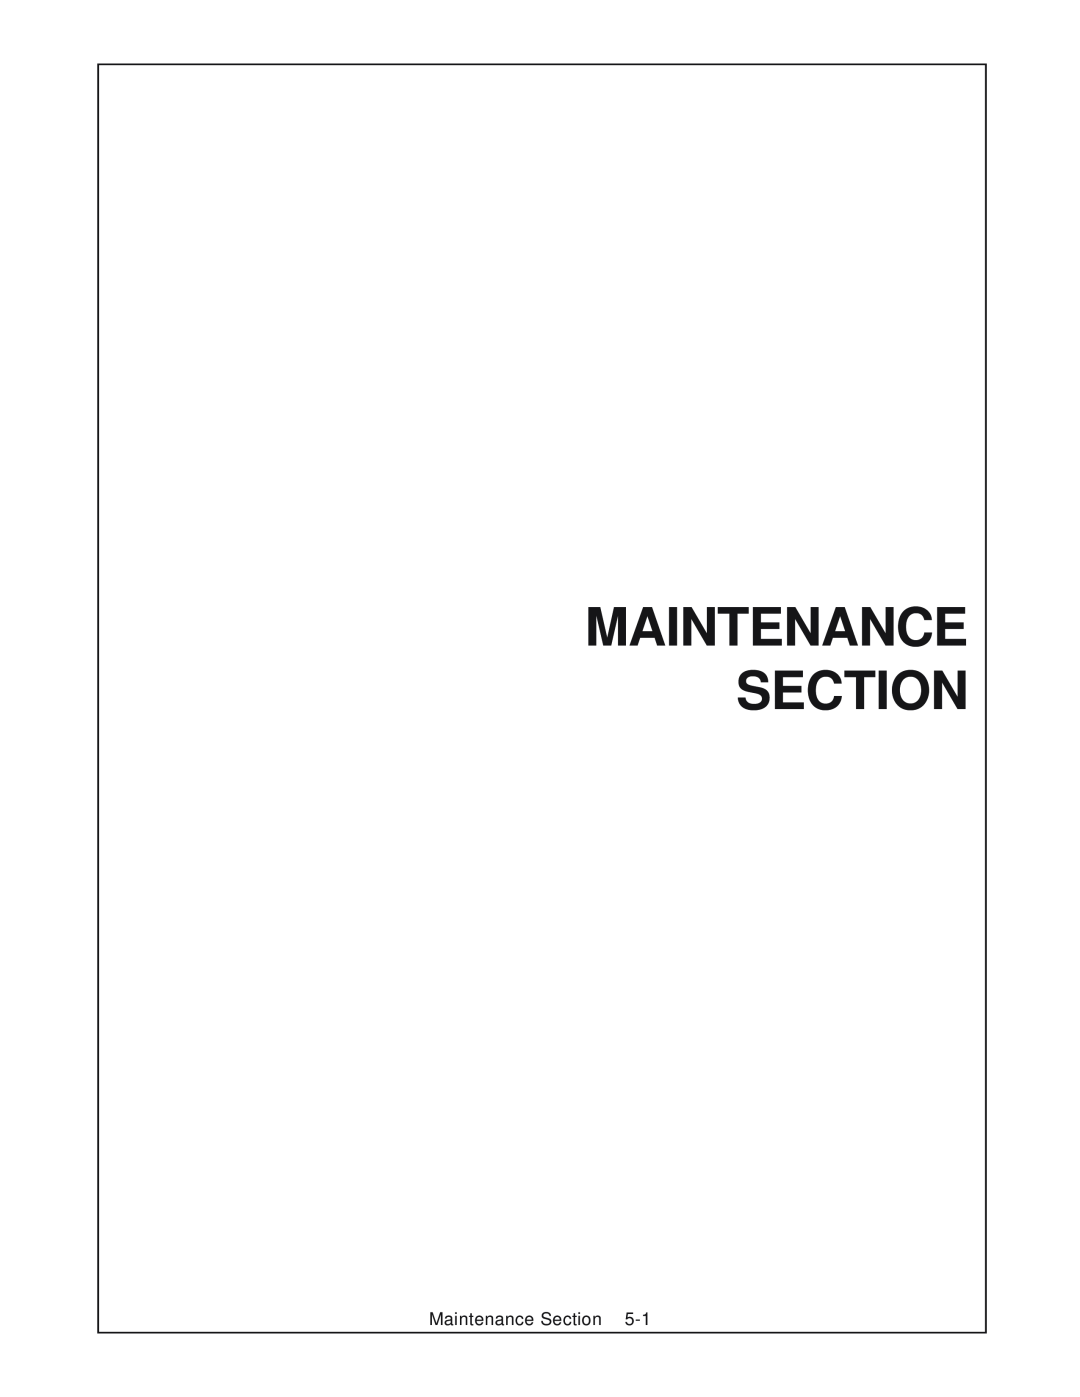 Tiger Products Co., Ltd RBF-12C manual Maintenance Section 